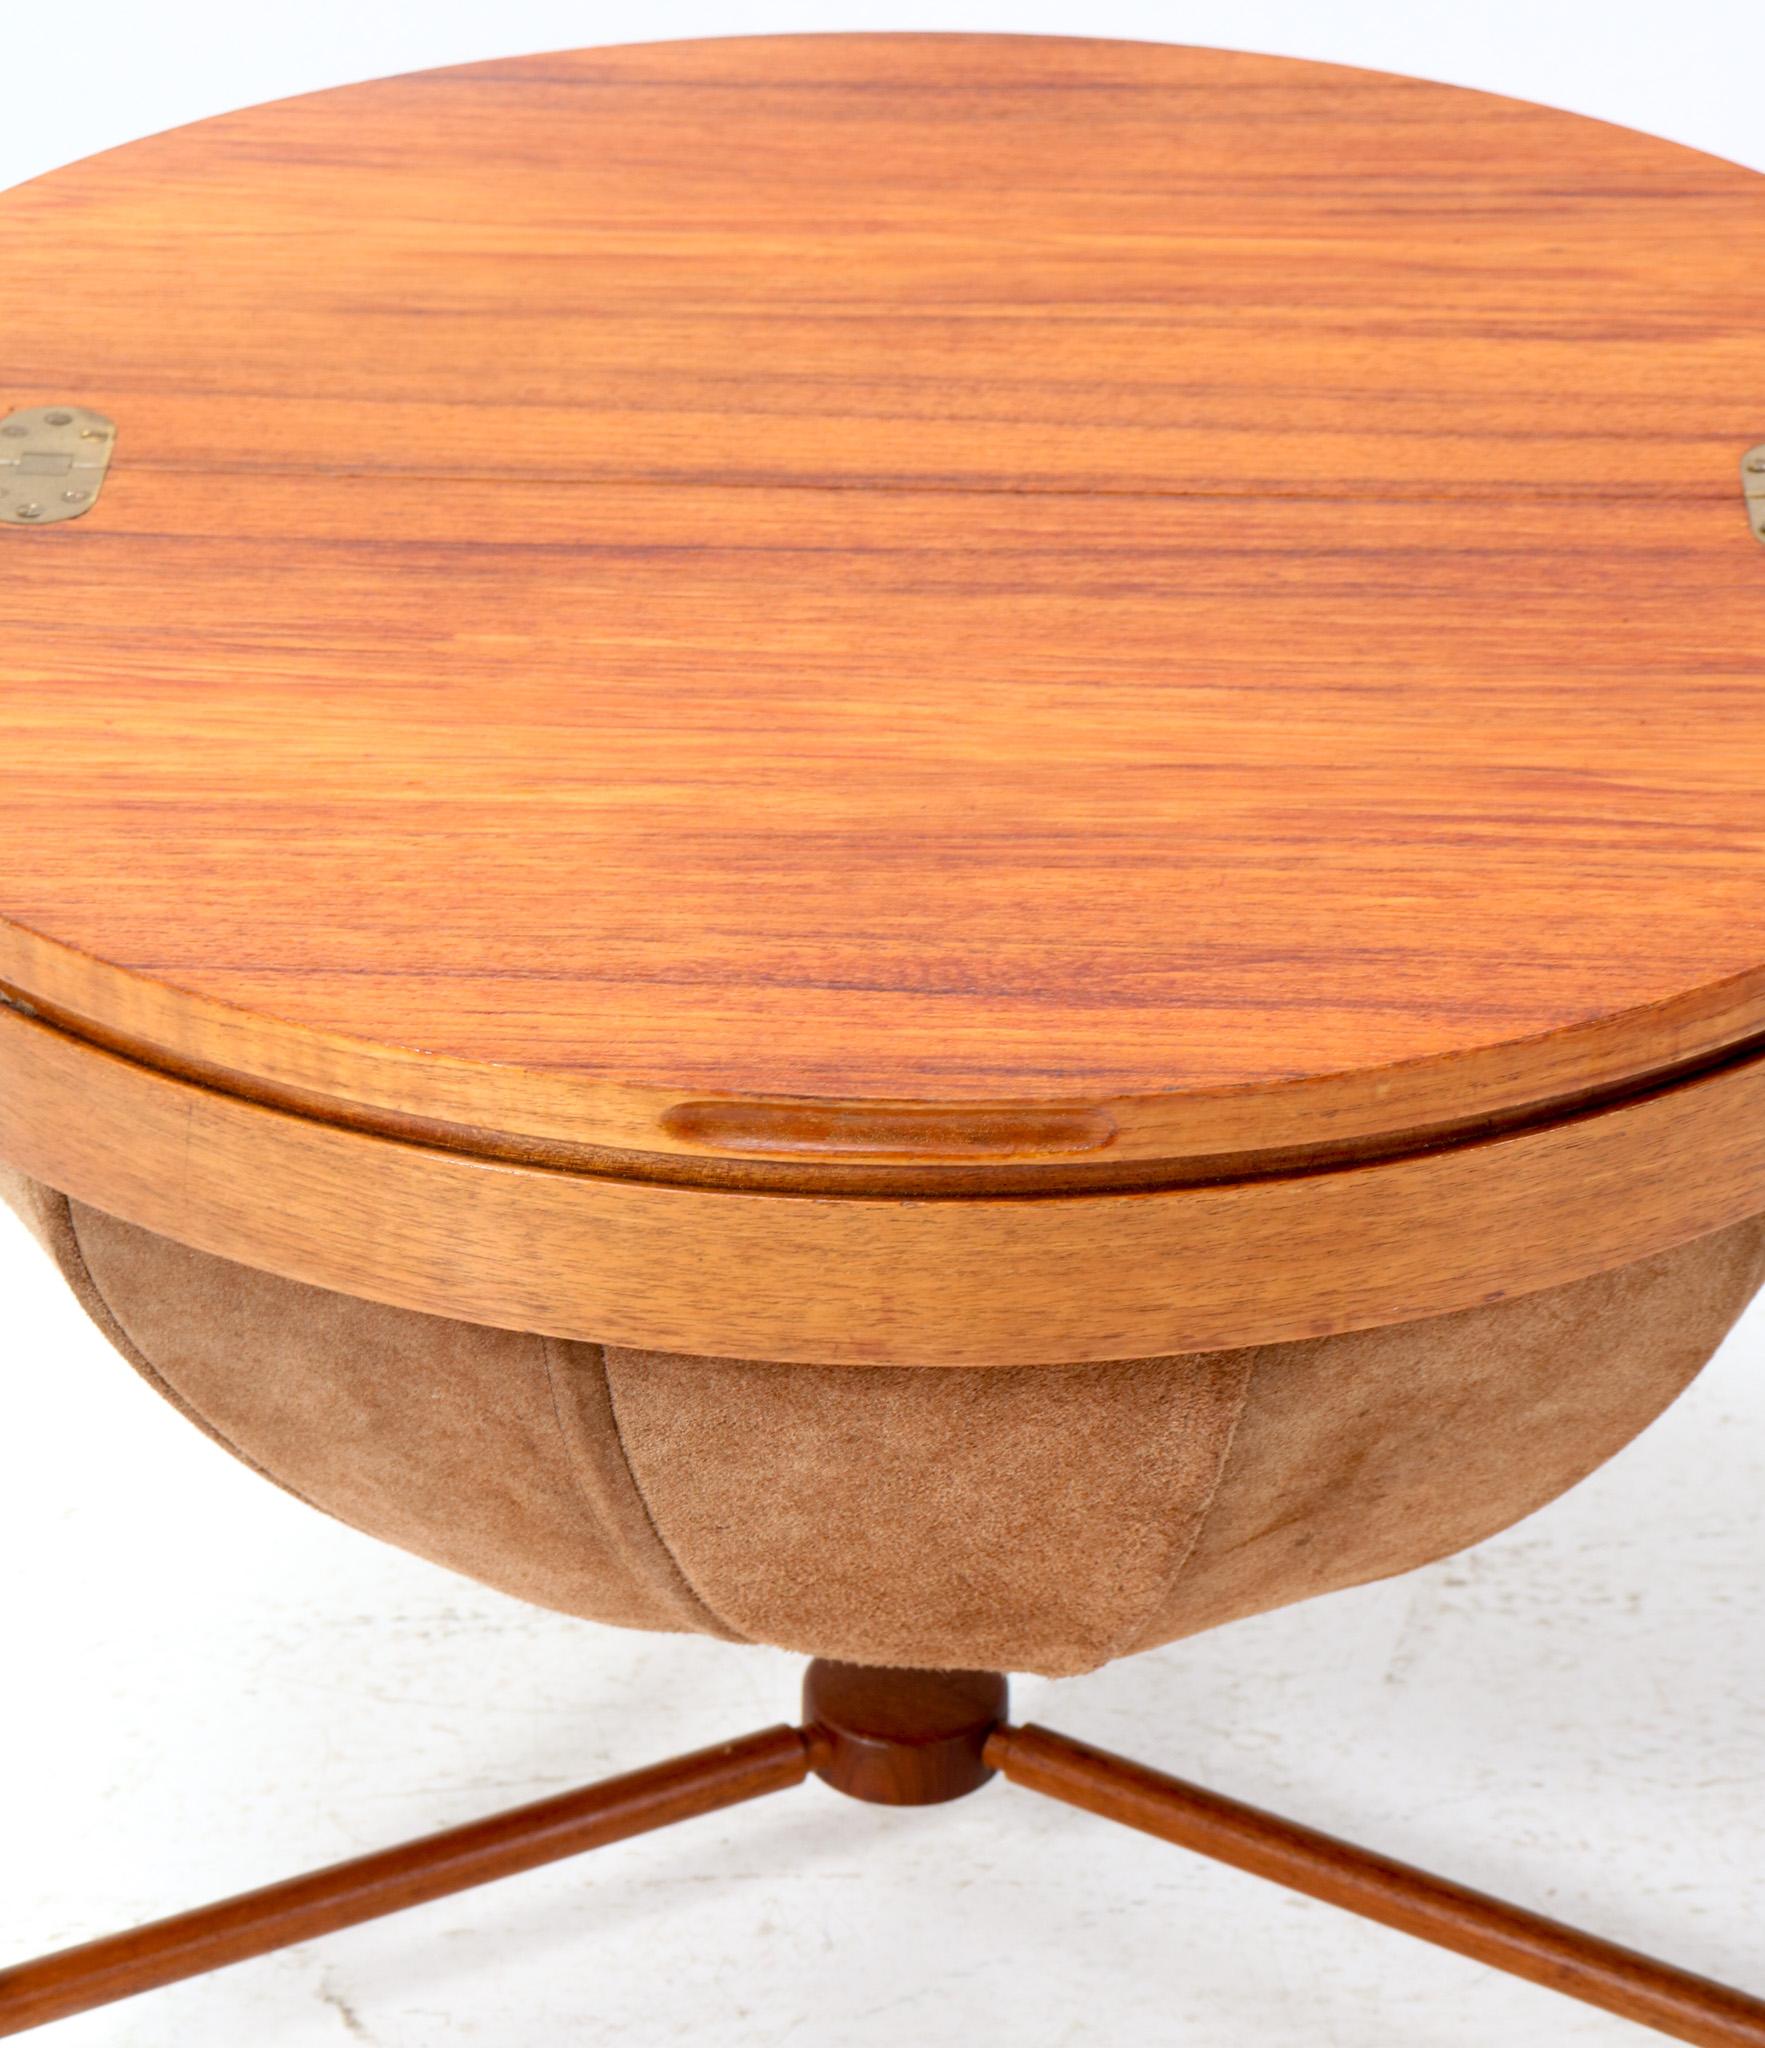  Mid-Century Modern Teak Sewing Table by Rastad & Relling for Rasmus Solberg In Good Condition For Sale In Amsterdam, NL